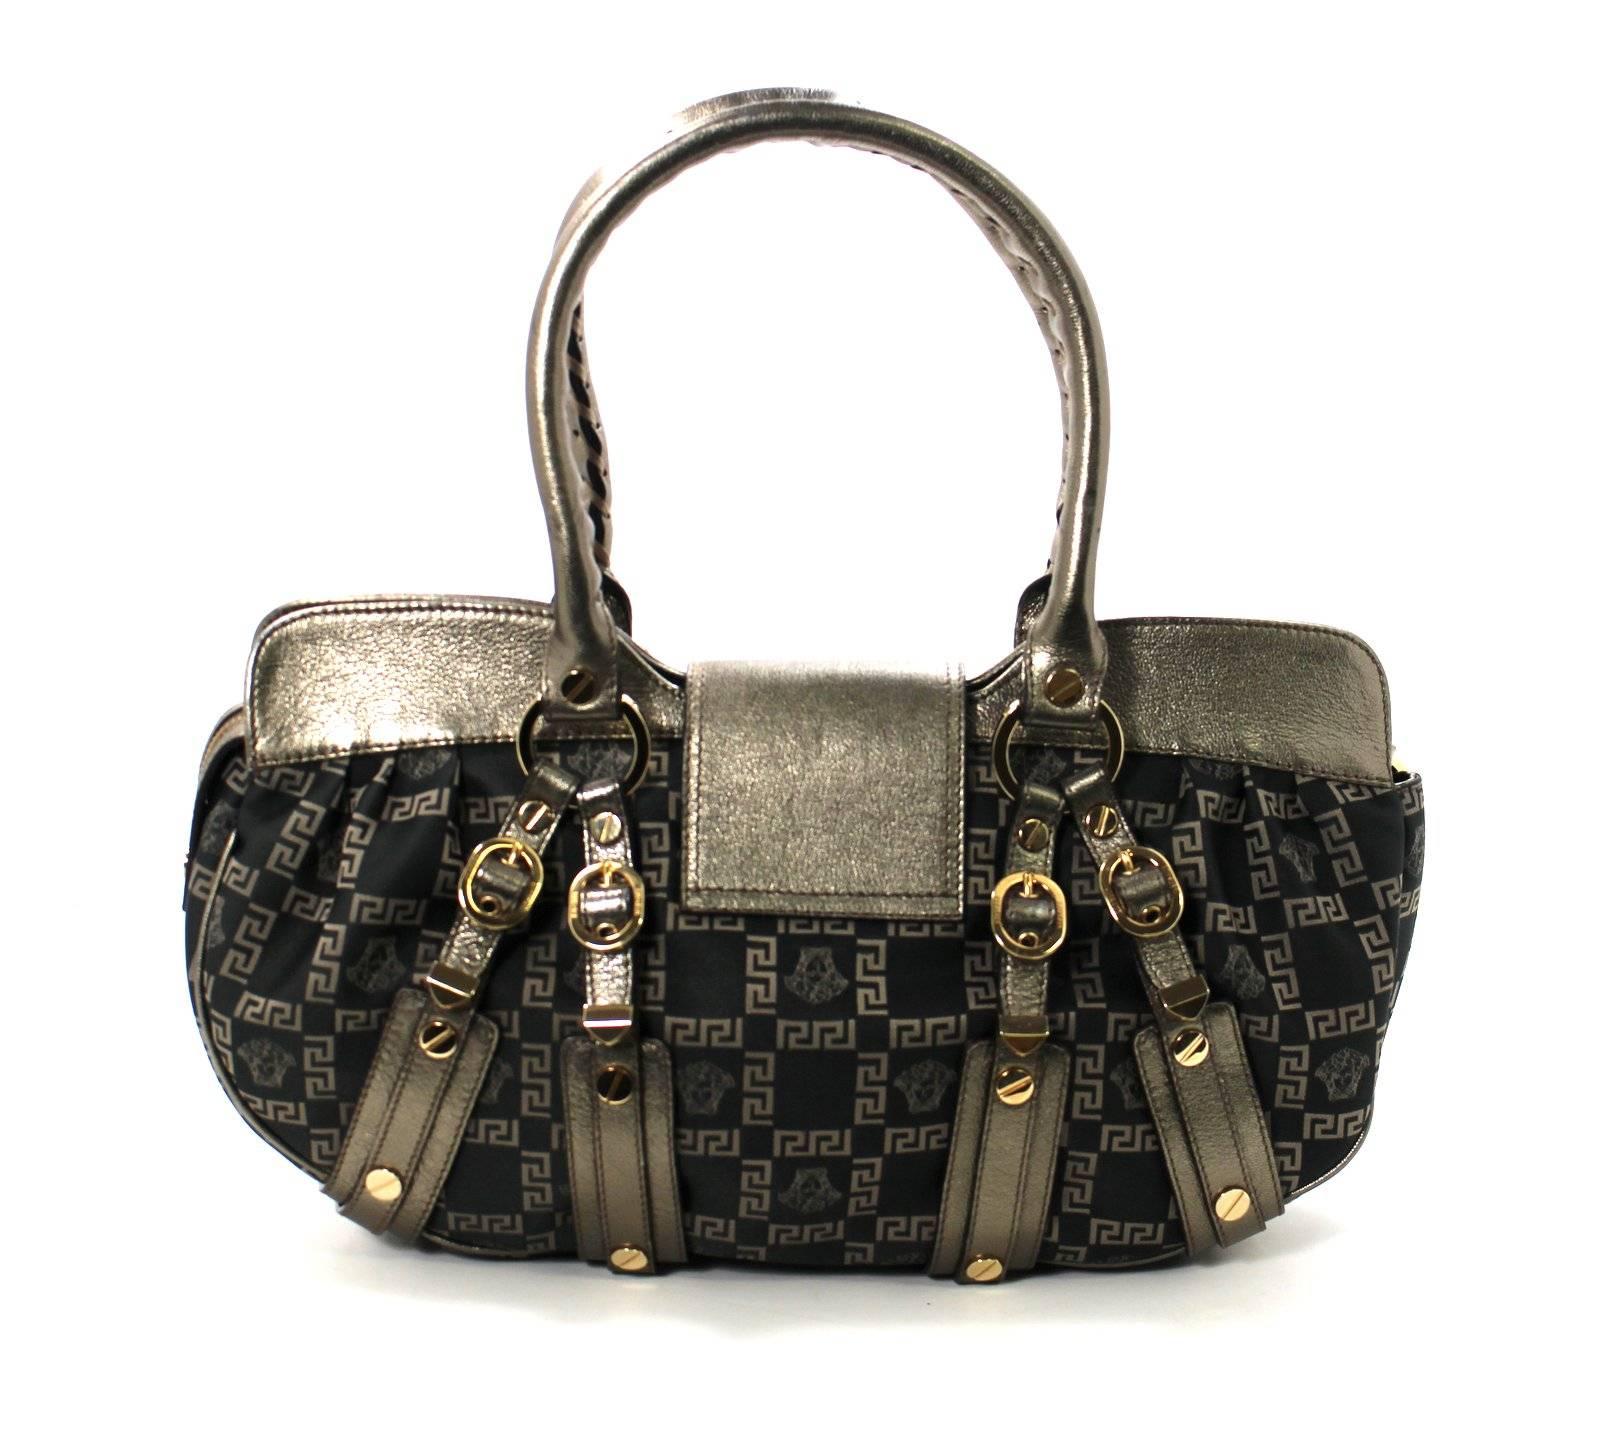 
MINT Condition- Versace Jacquard Medusa Buckle Bag approximate retail $1,095.00
Dark brown silk is accented with signature Versace print- Greek key pattern with Medusa heads.  Top zipper has a leather flap over with concealed magnetic closure